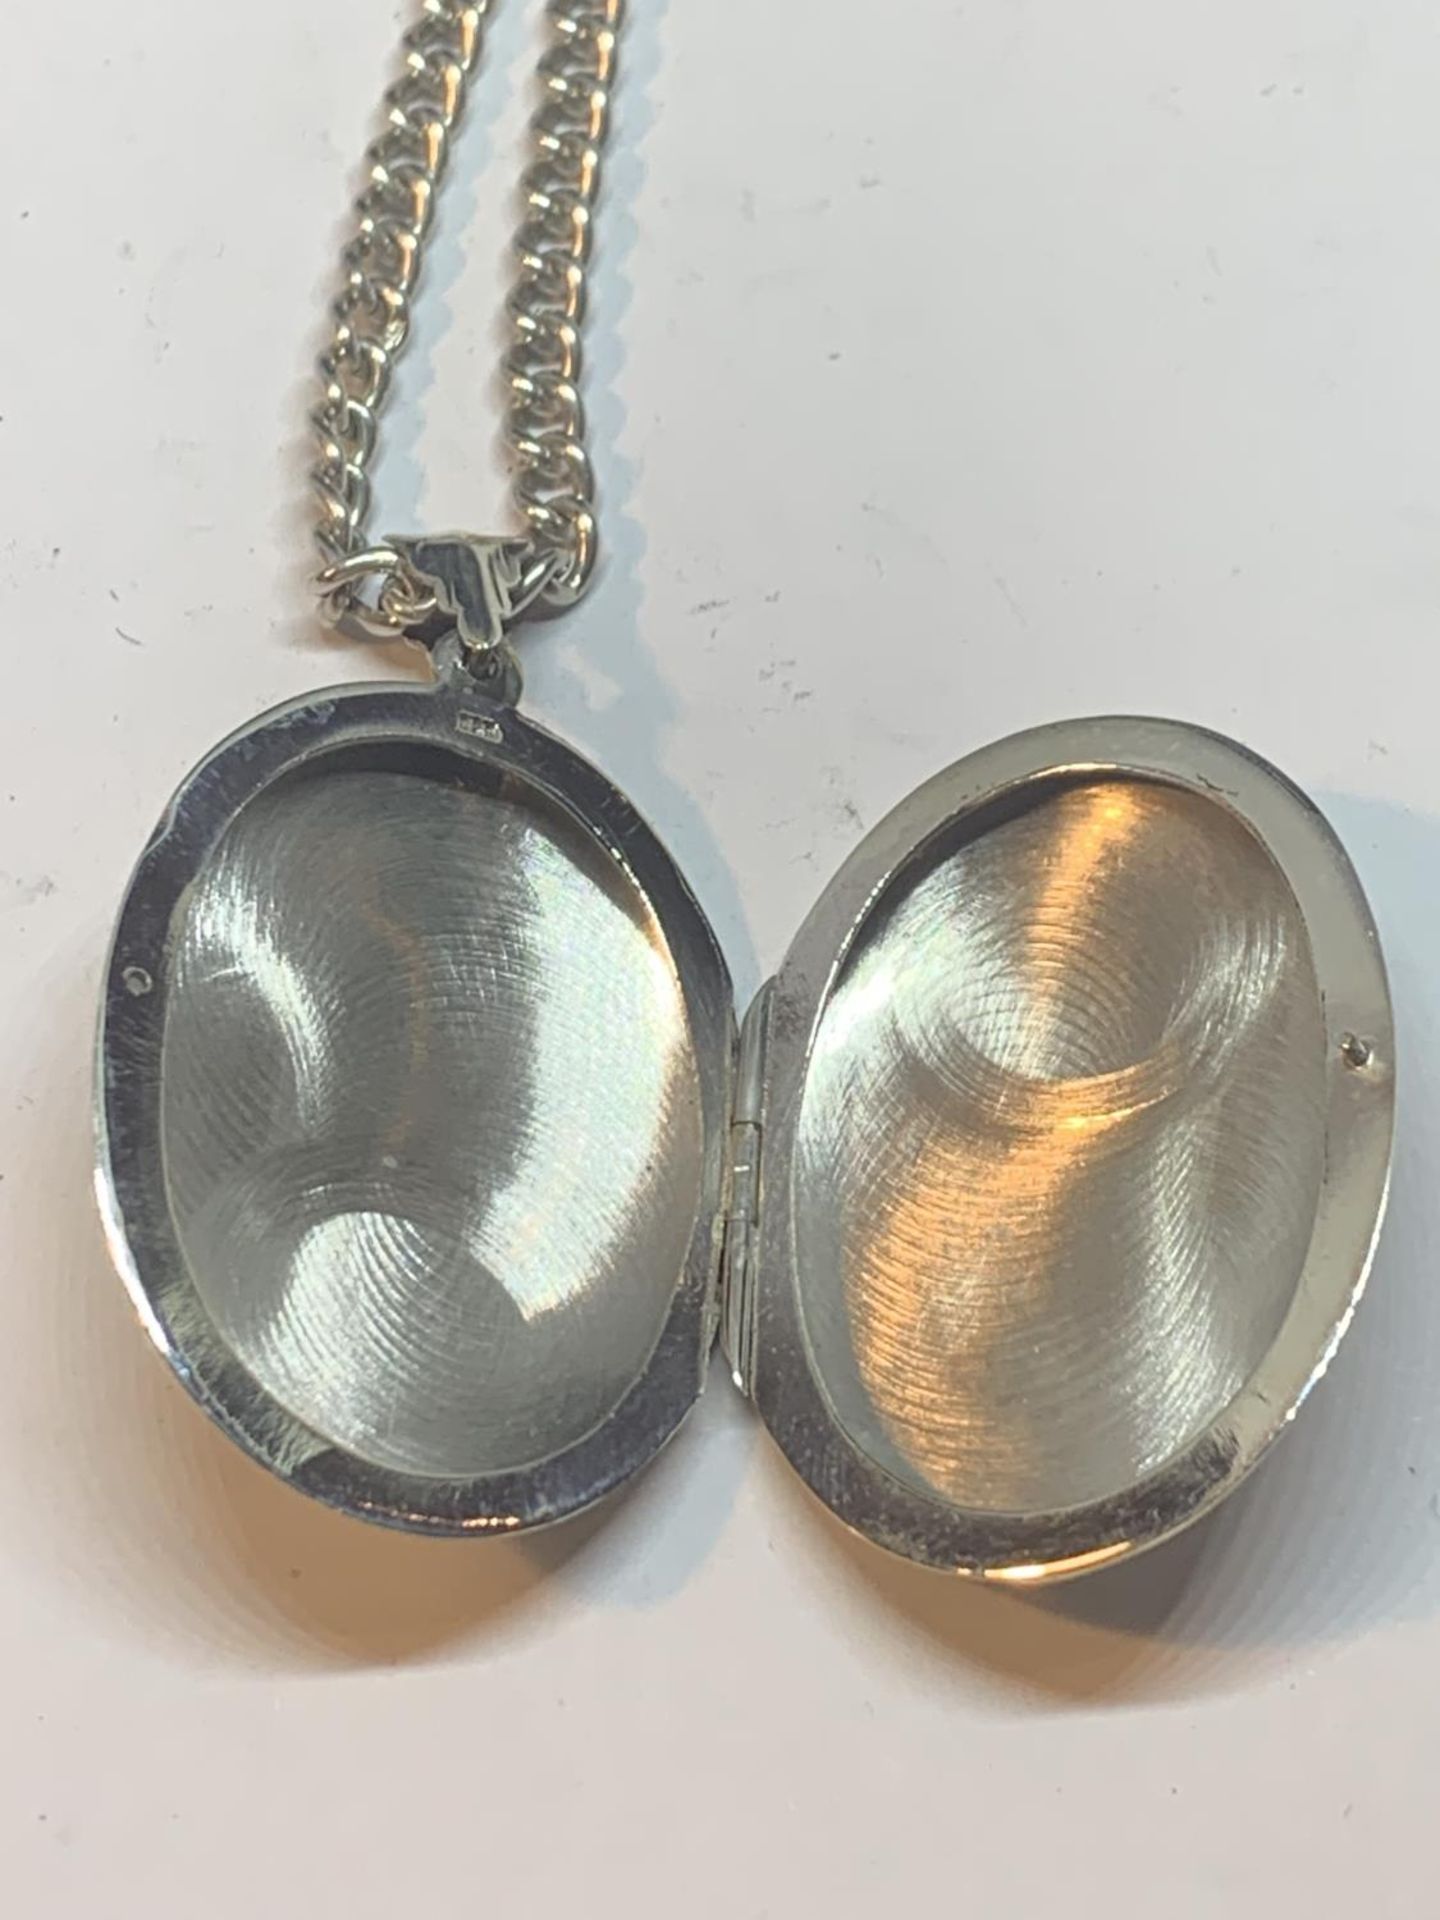 A SILVER NECKLACE WITH A LARGE OVAL LOCKET PENDANT - Image 4 of 4